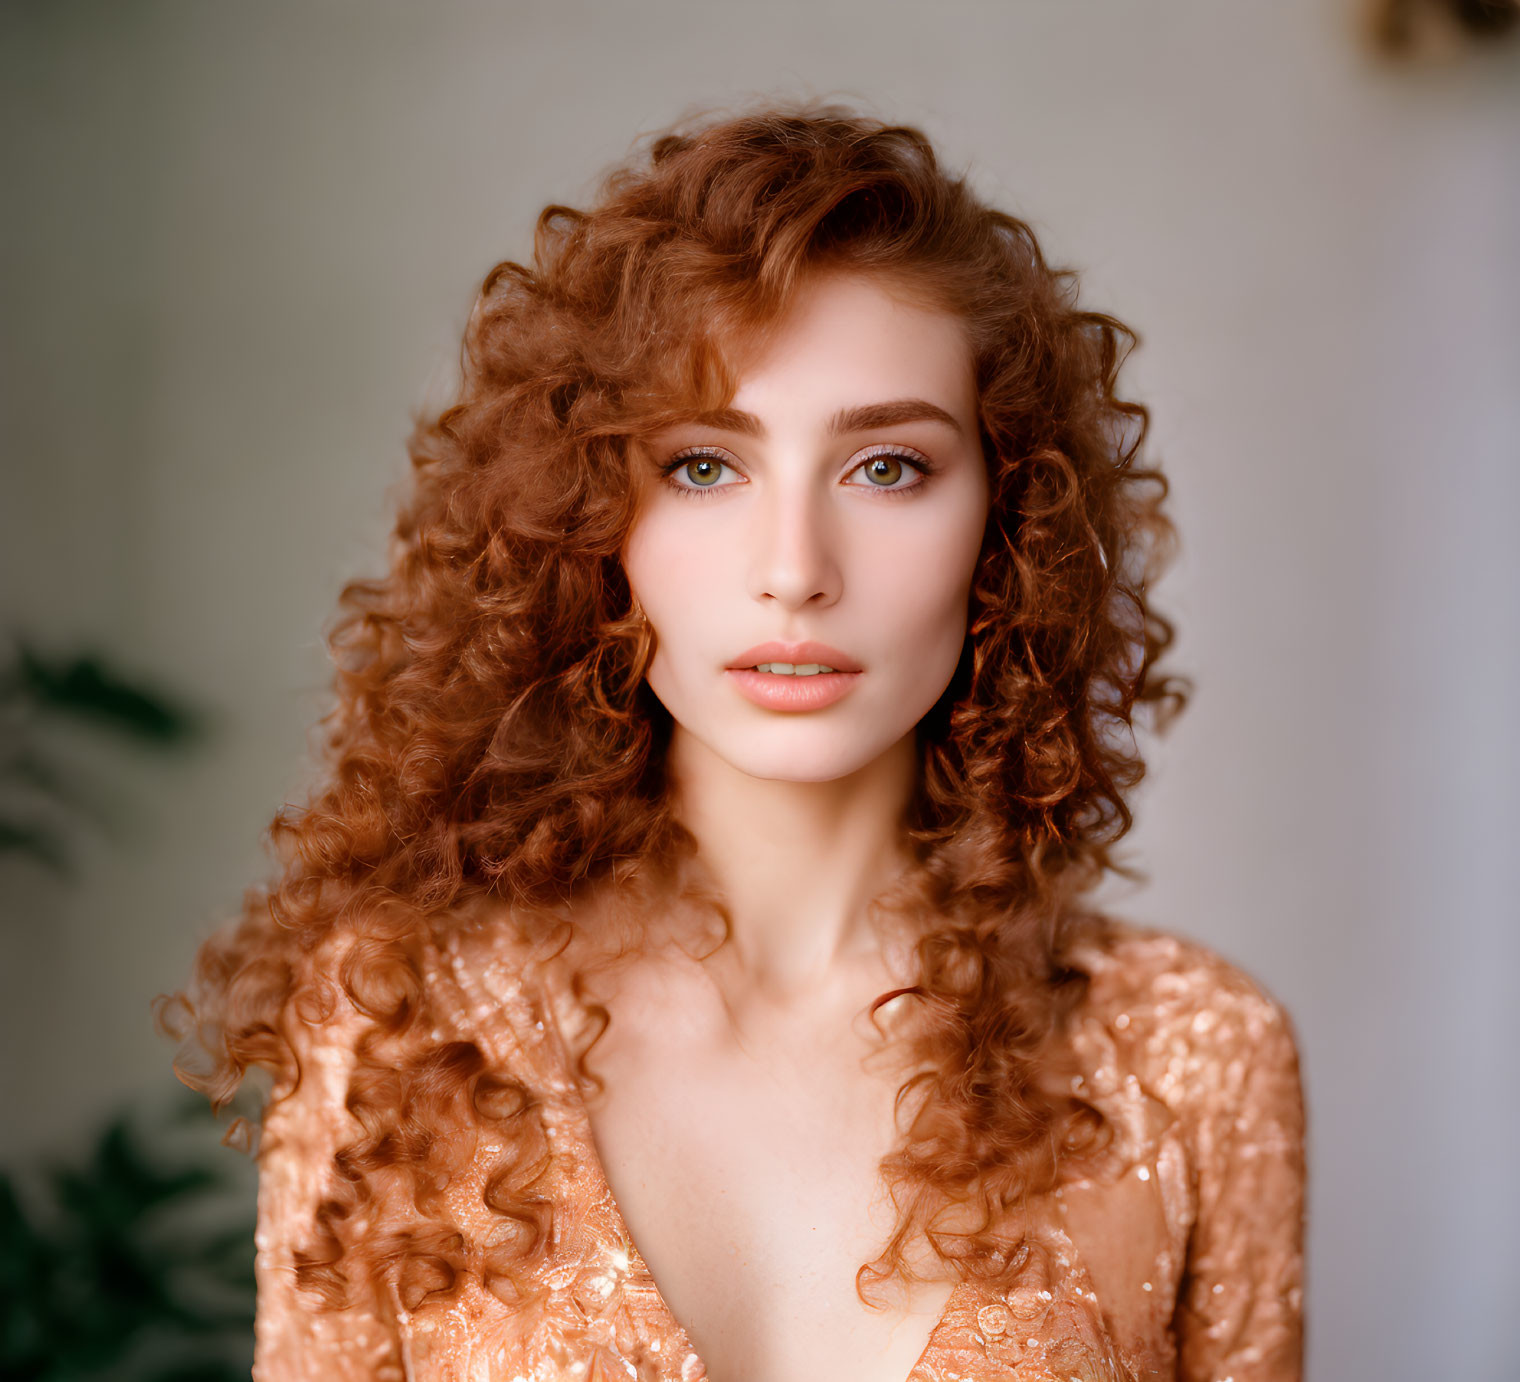 Curly Red-Haired Woman in Peach Blouse with Green Eyes Portrait